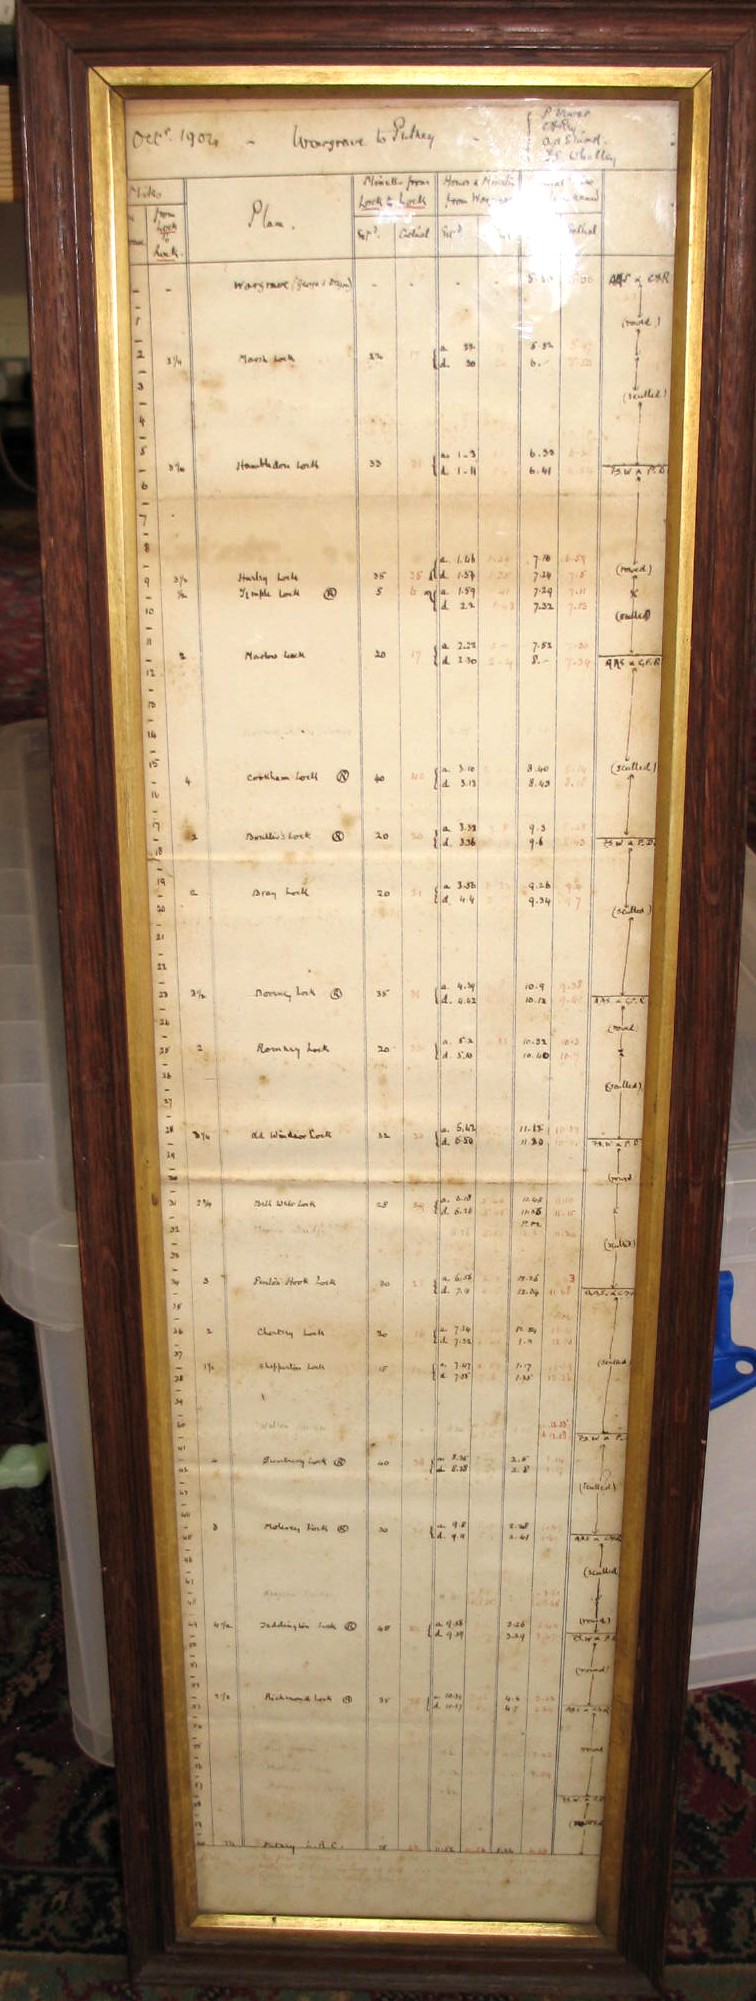 [ROWING] a ms. record of sculling times & distances Wargrave to Putney, 1904, f. & g.